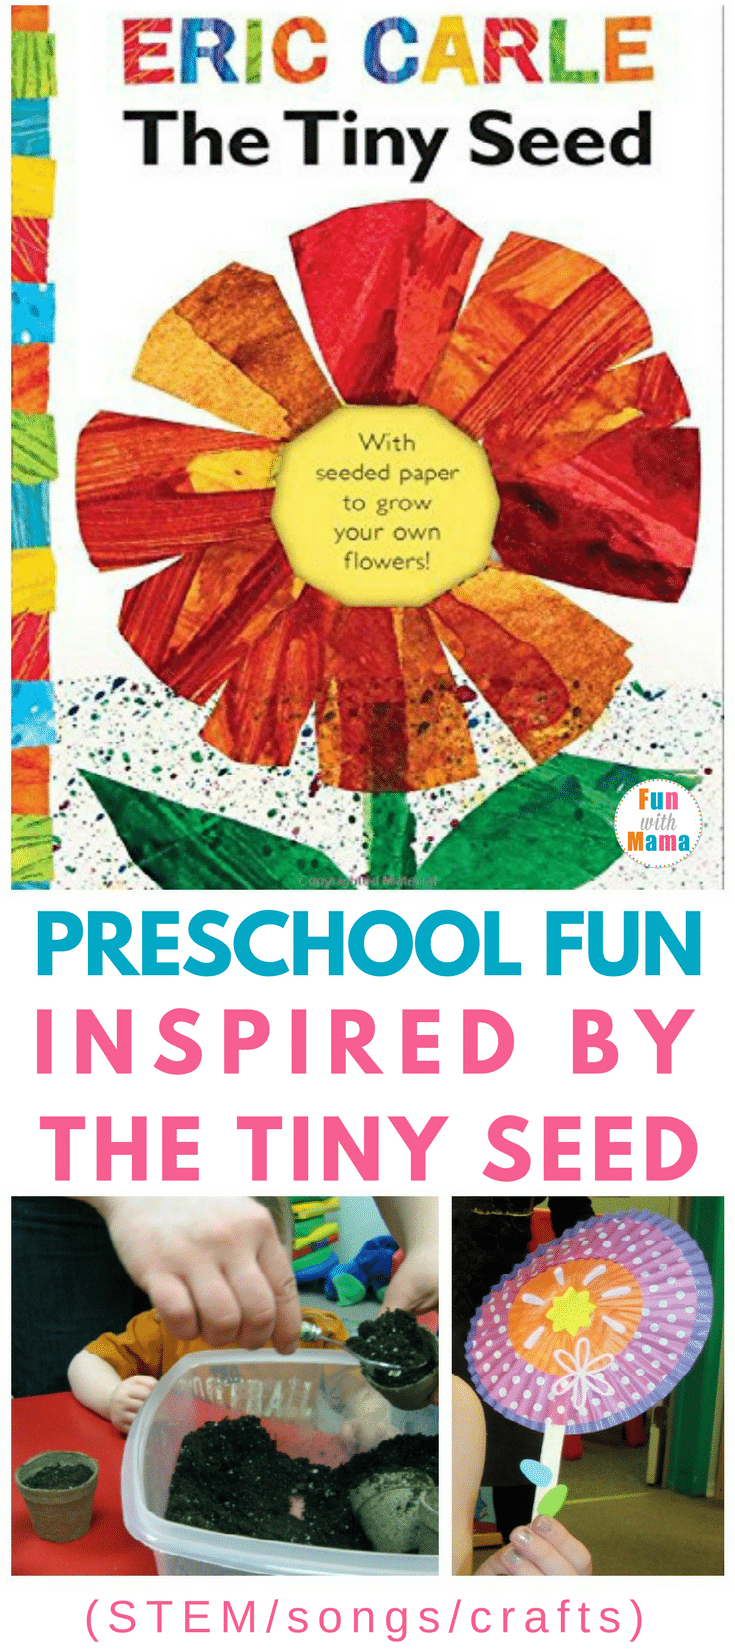 The Tiny Seed: Awesome Activities To Enjoy With Your